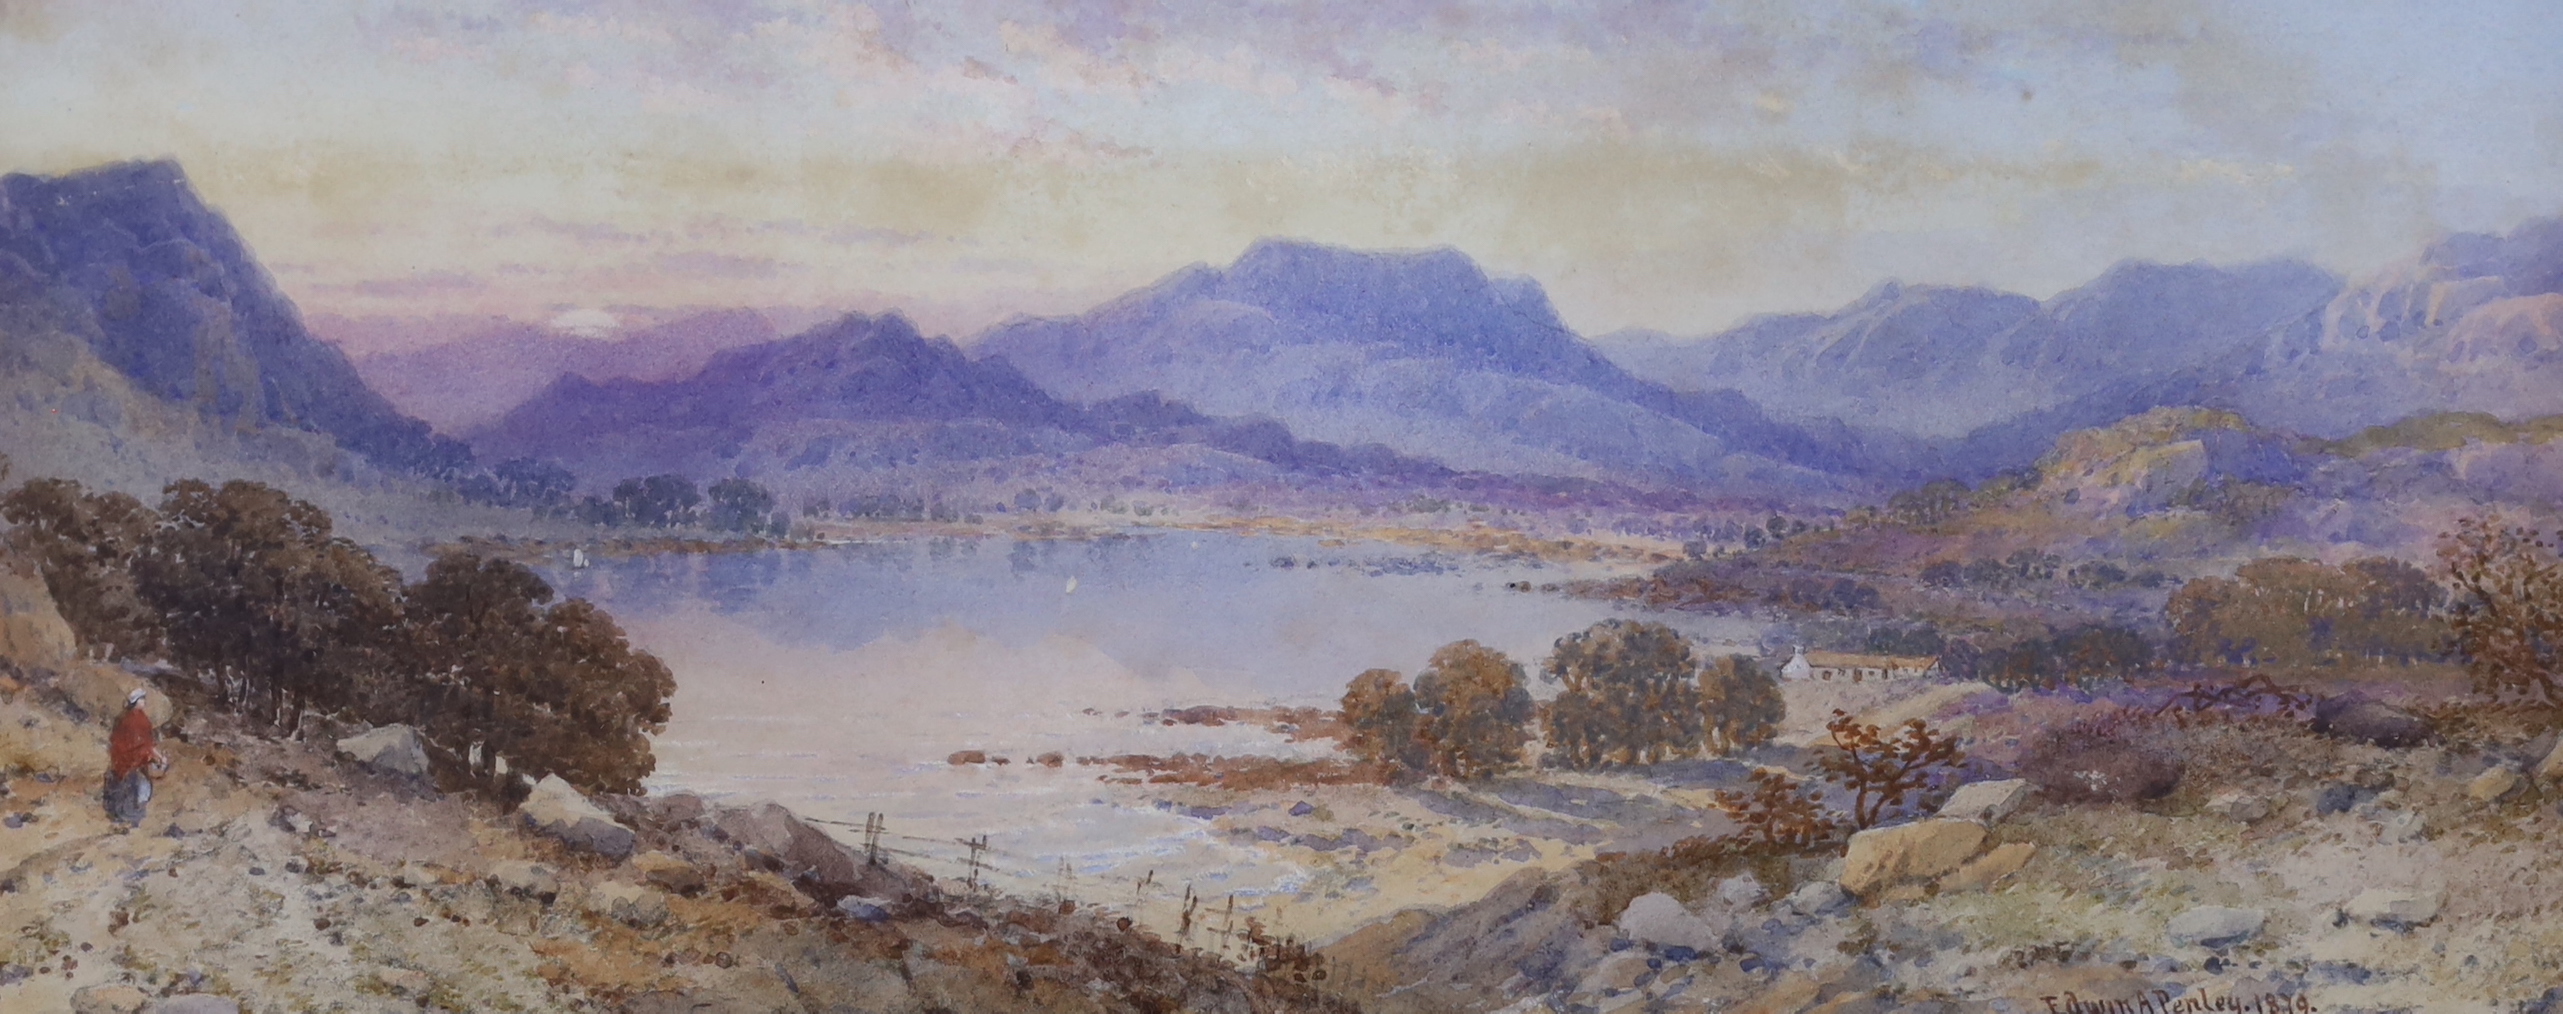 Six Victorian watercolour landscapes, by Edwin and Aaron Penley, The majority signed, the largest 18 X 46 cm, together with two volumes of sketching from nature in watercolours by Aaron Penley and albums of research on t